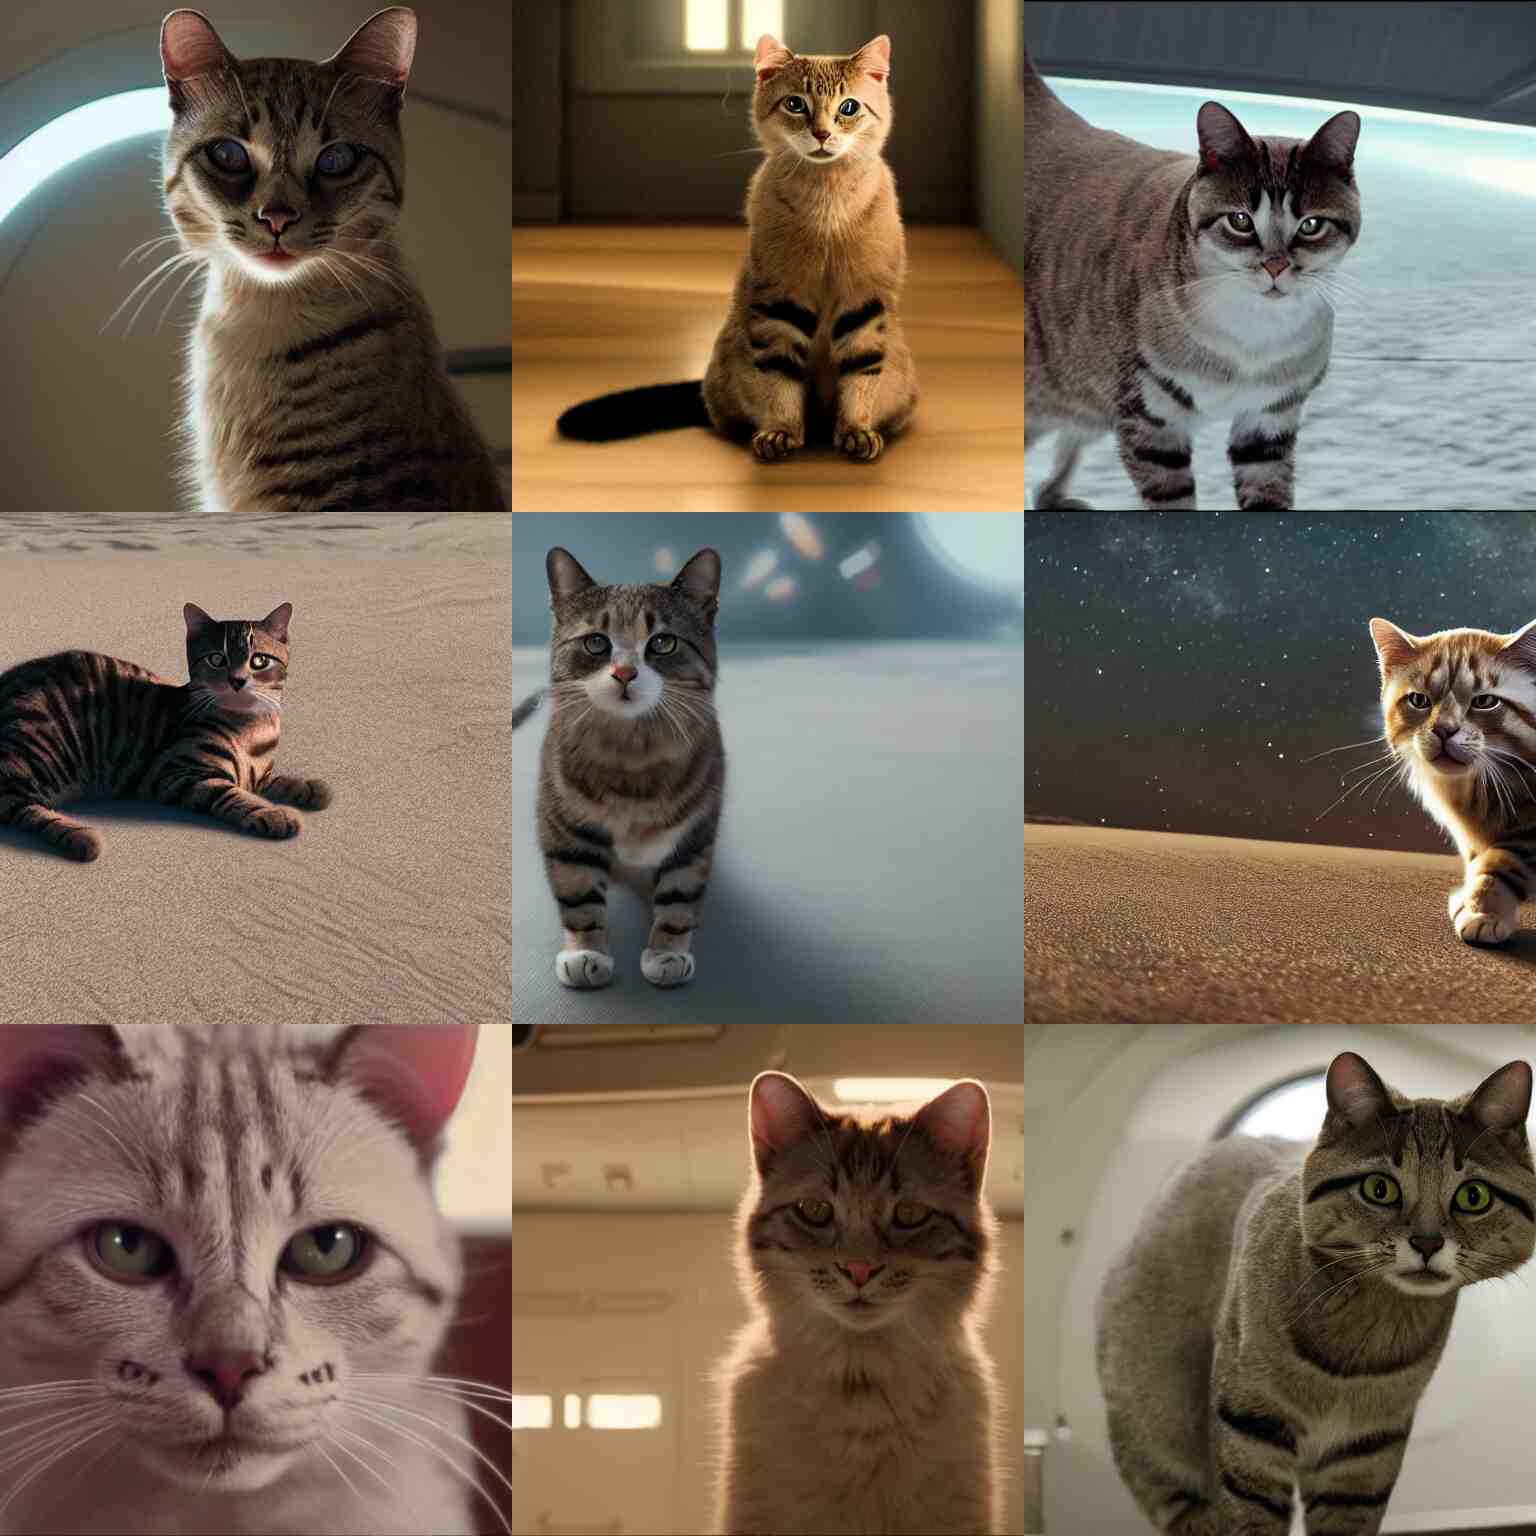 Sorting Cat Images By Breed Has Never Been So Easy Thanks To This API